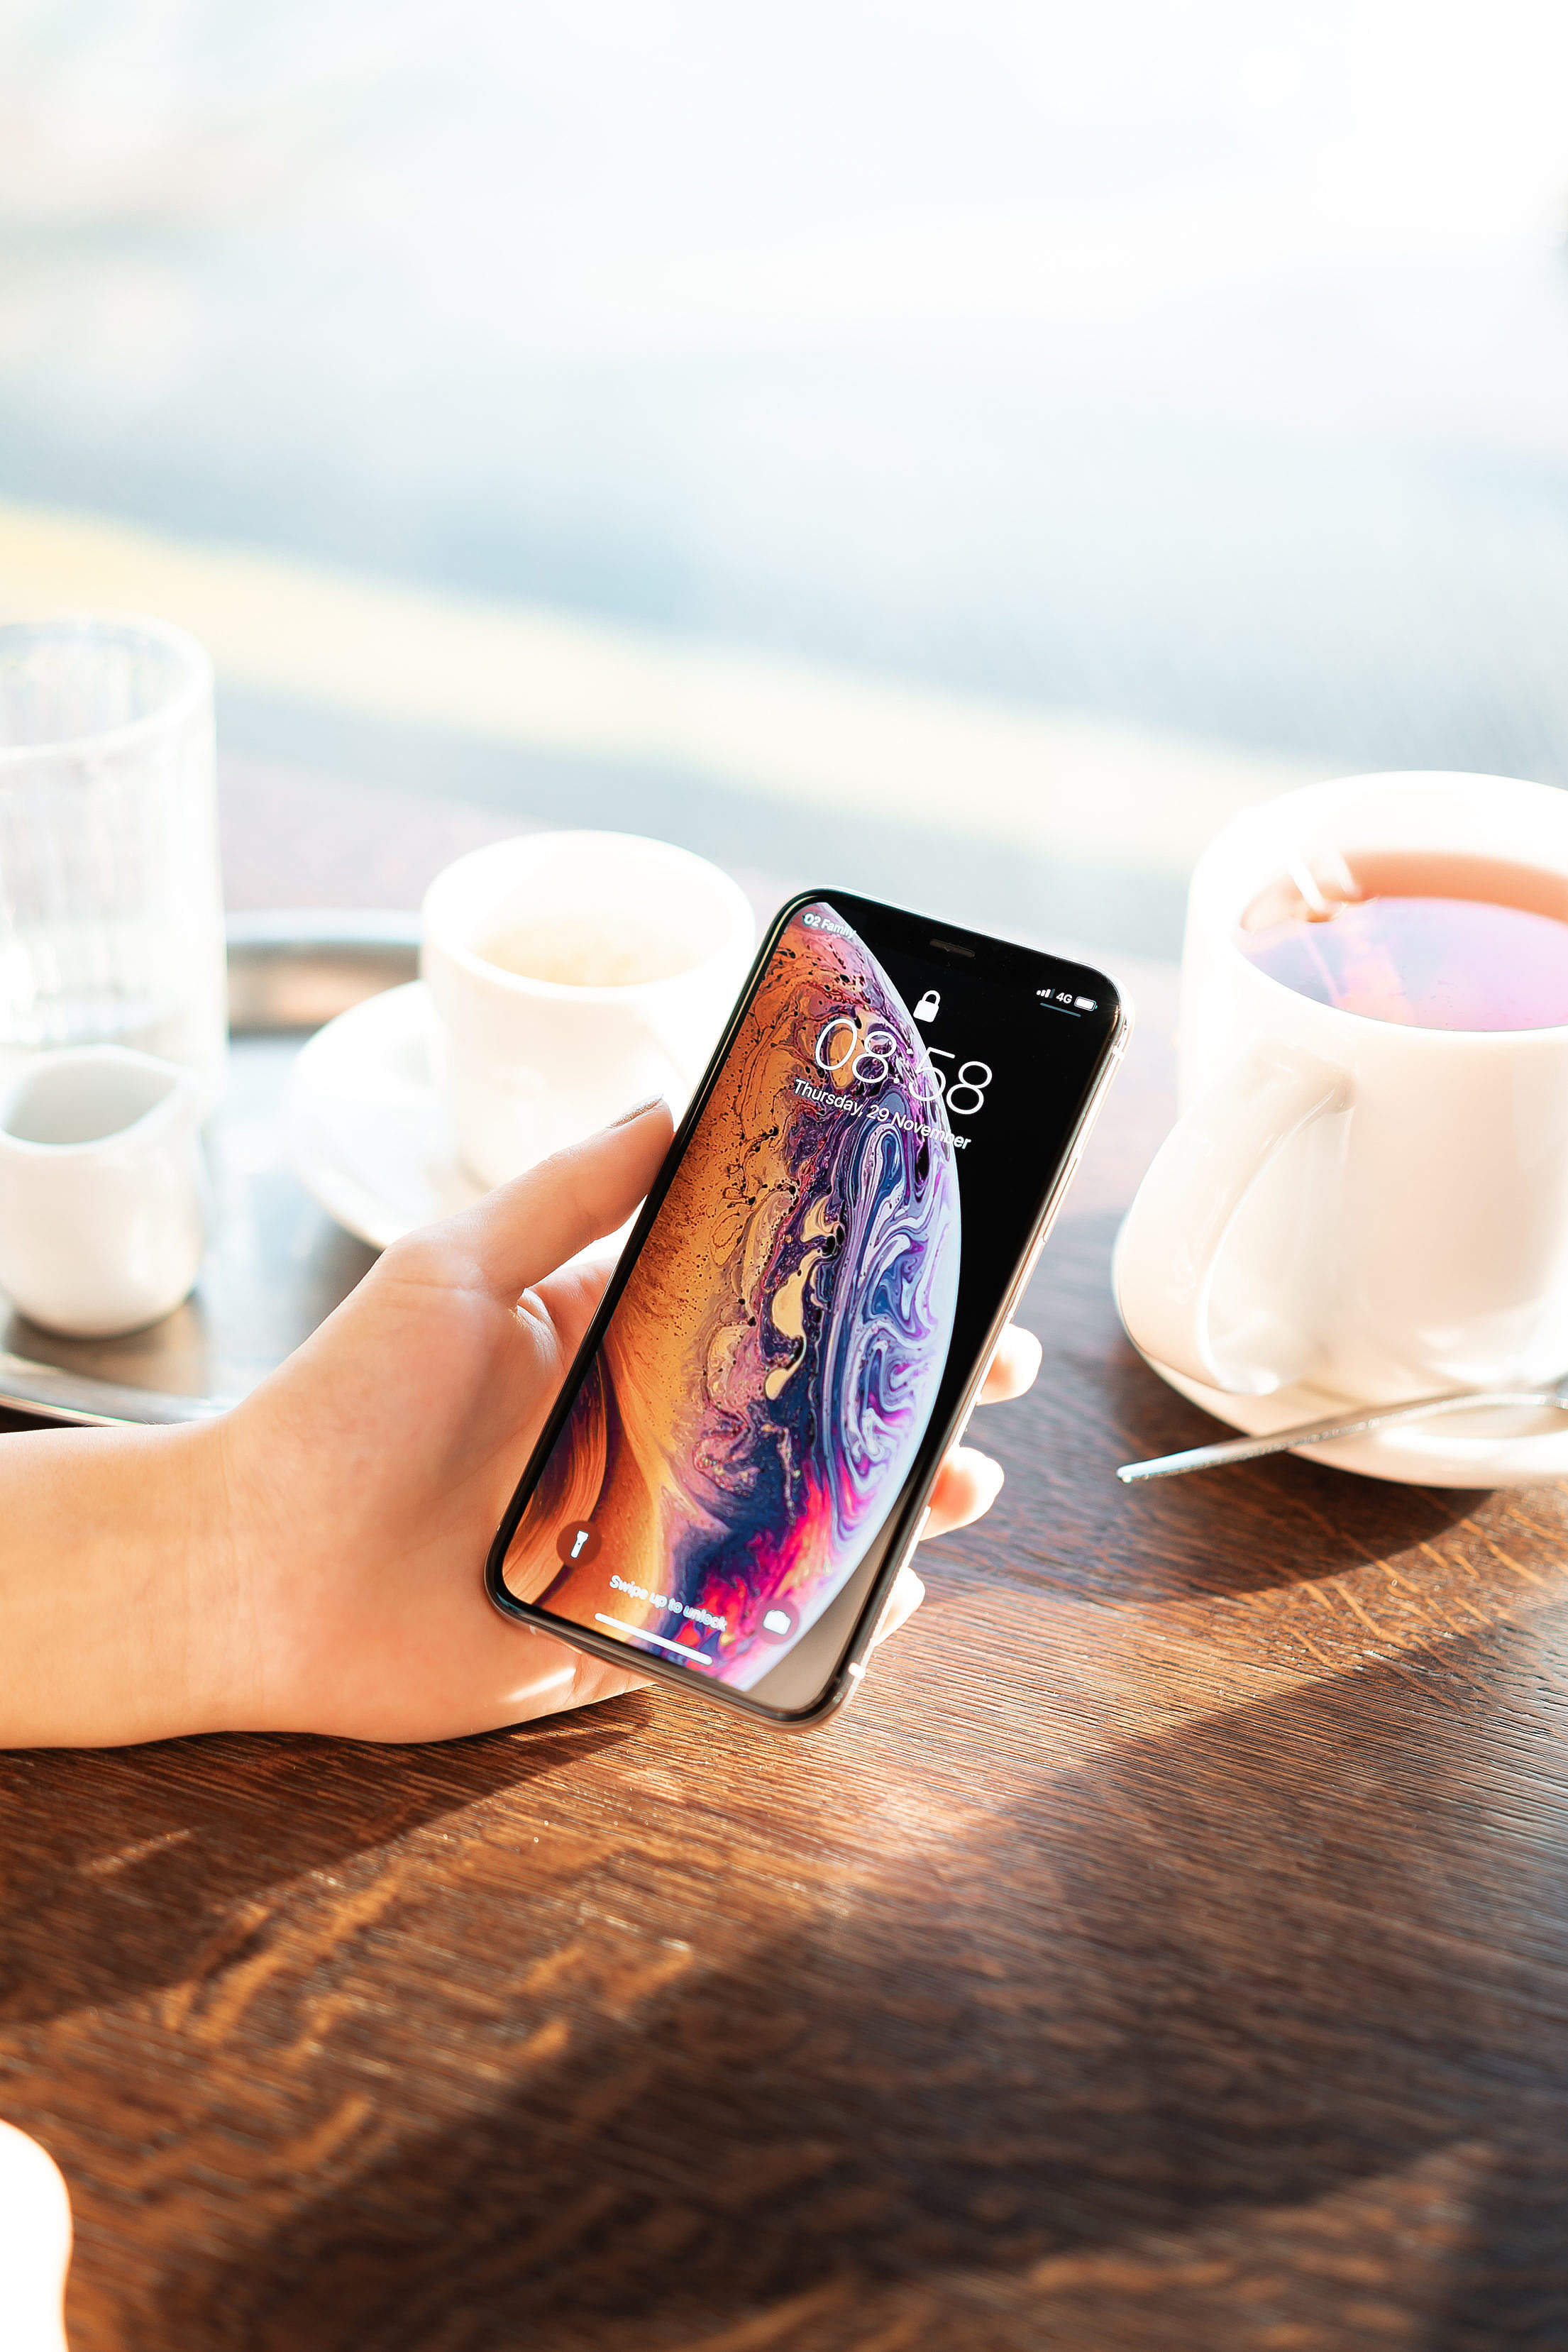 Showing an iPhone XS in Café Free Stock Photo